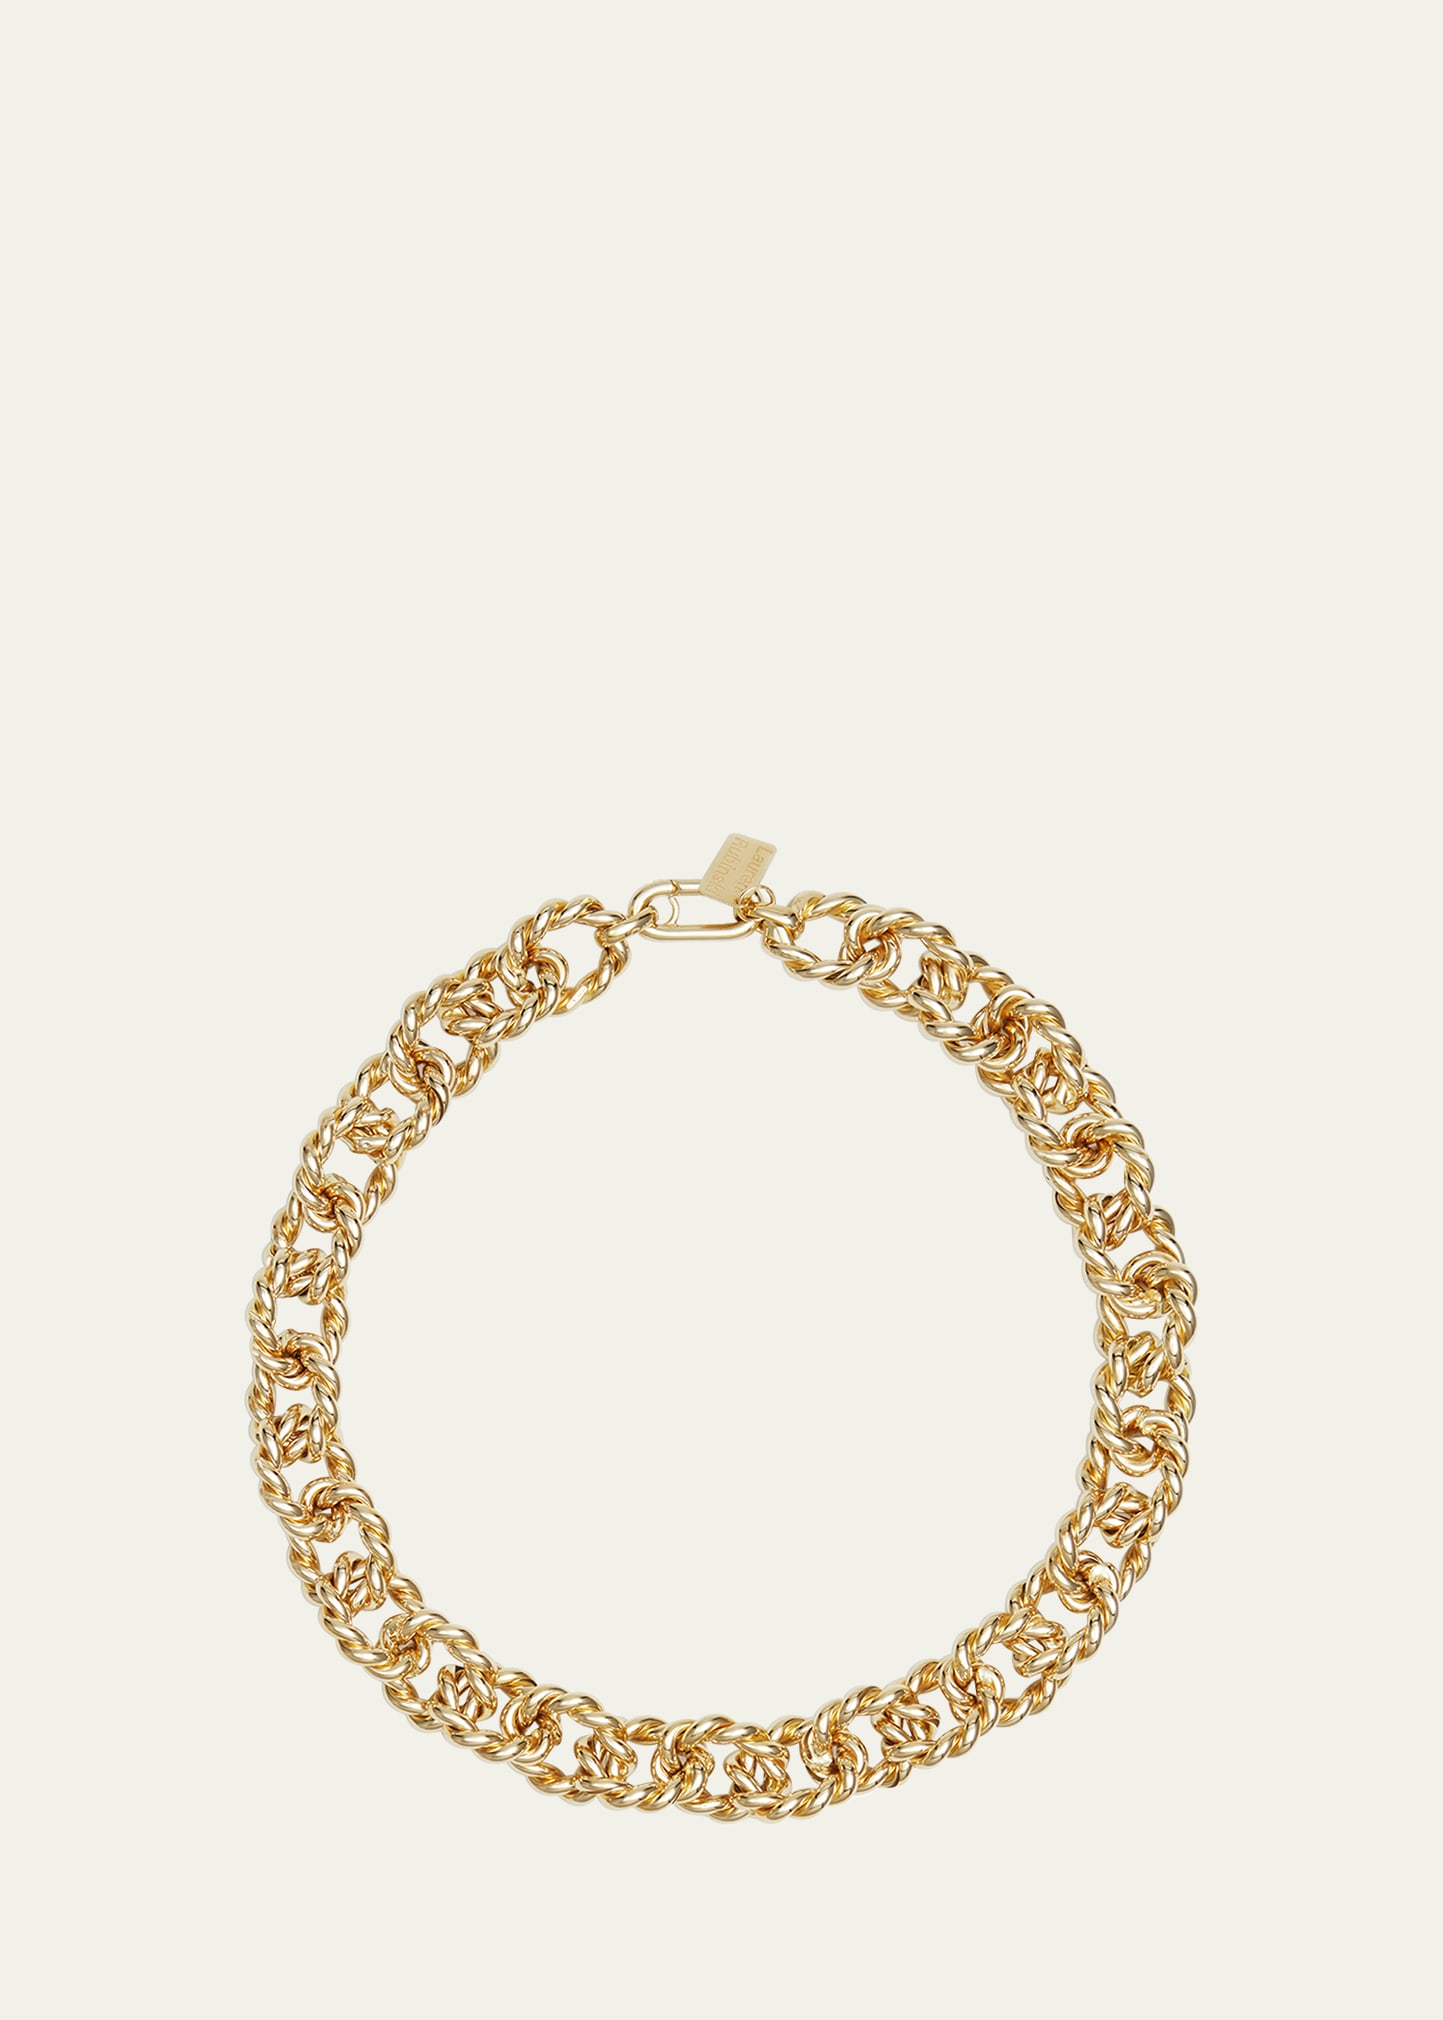 Lauren Rubinski Lr17 Large Twisted Link Short Necklace in 14K Yellow Gold with Extender